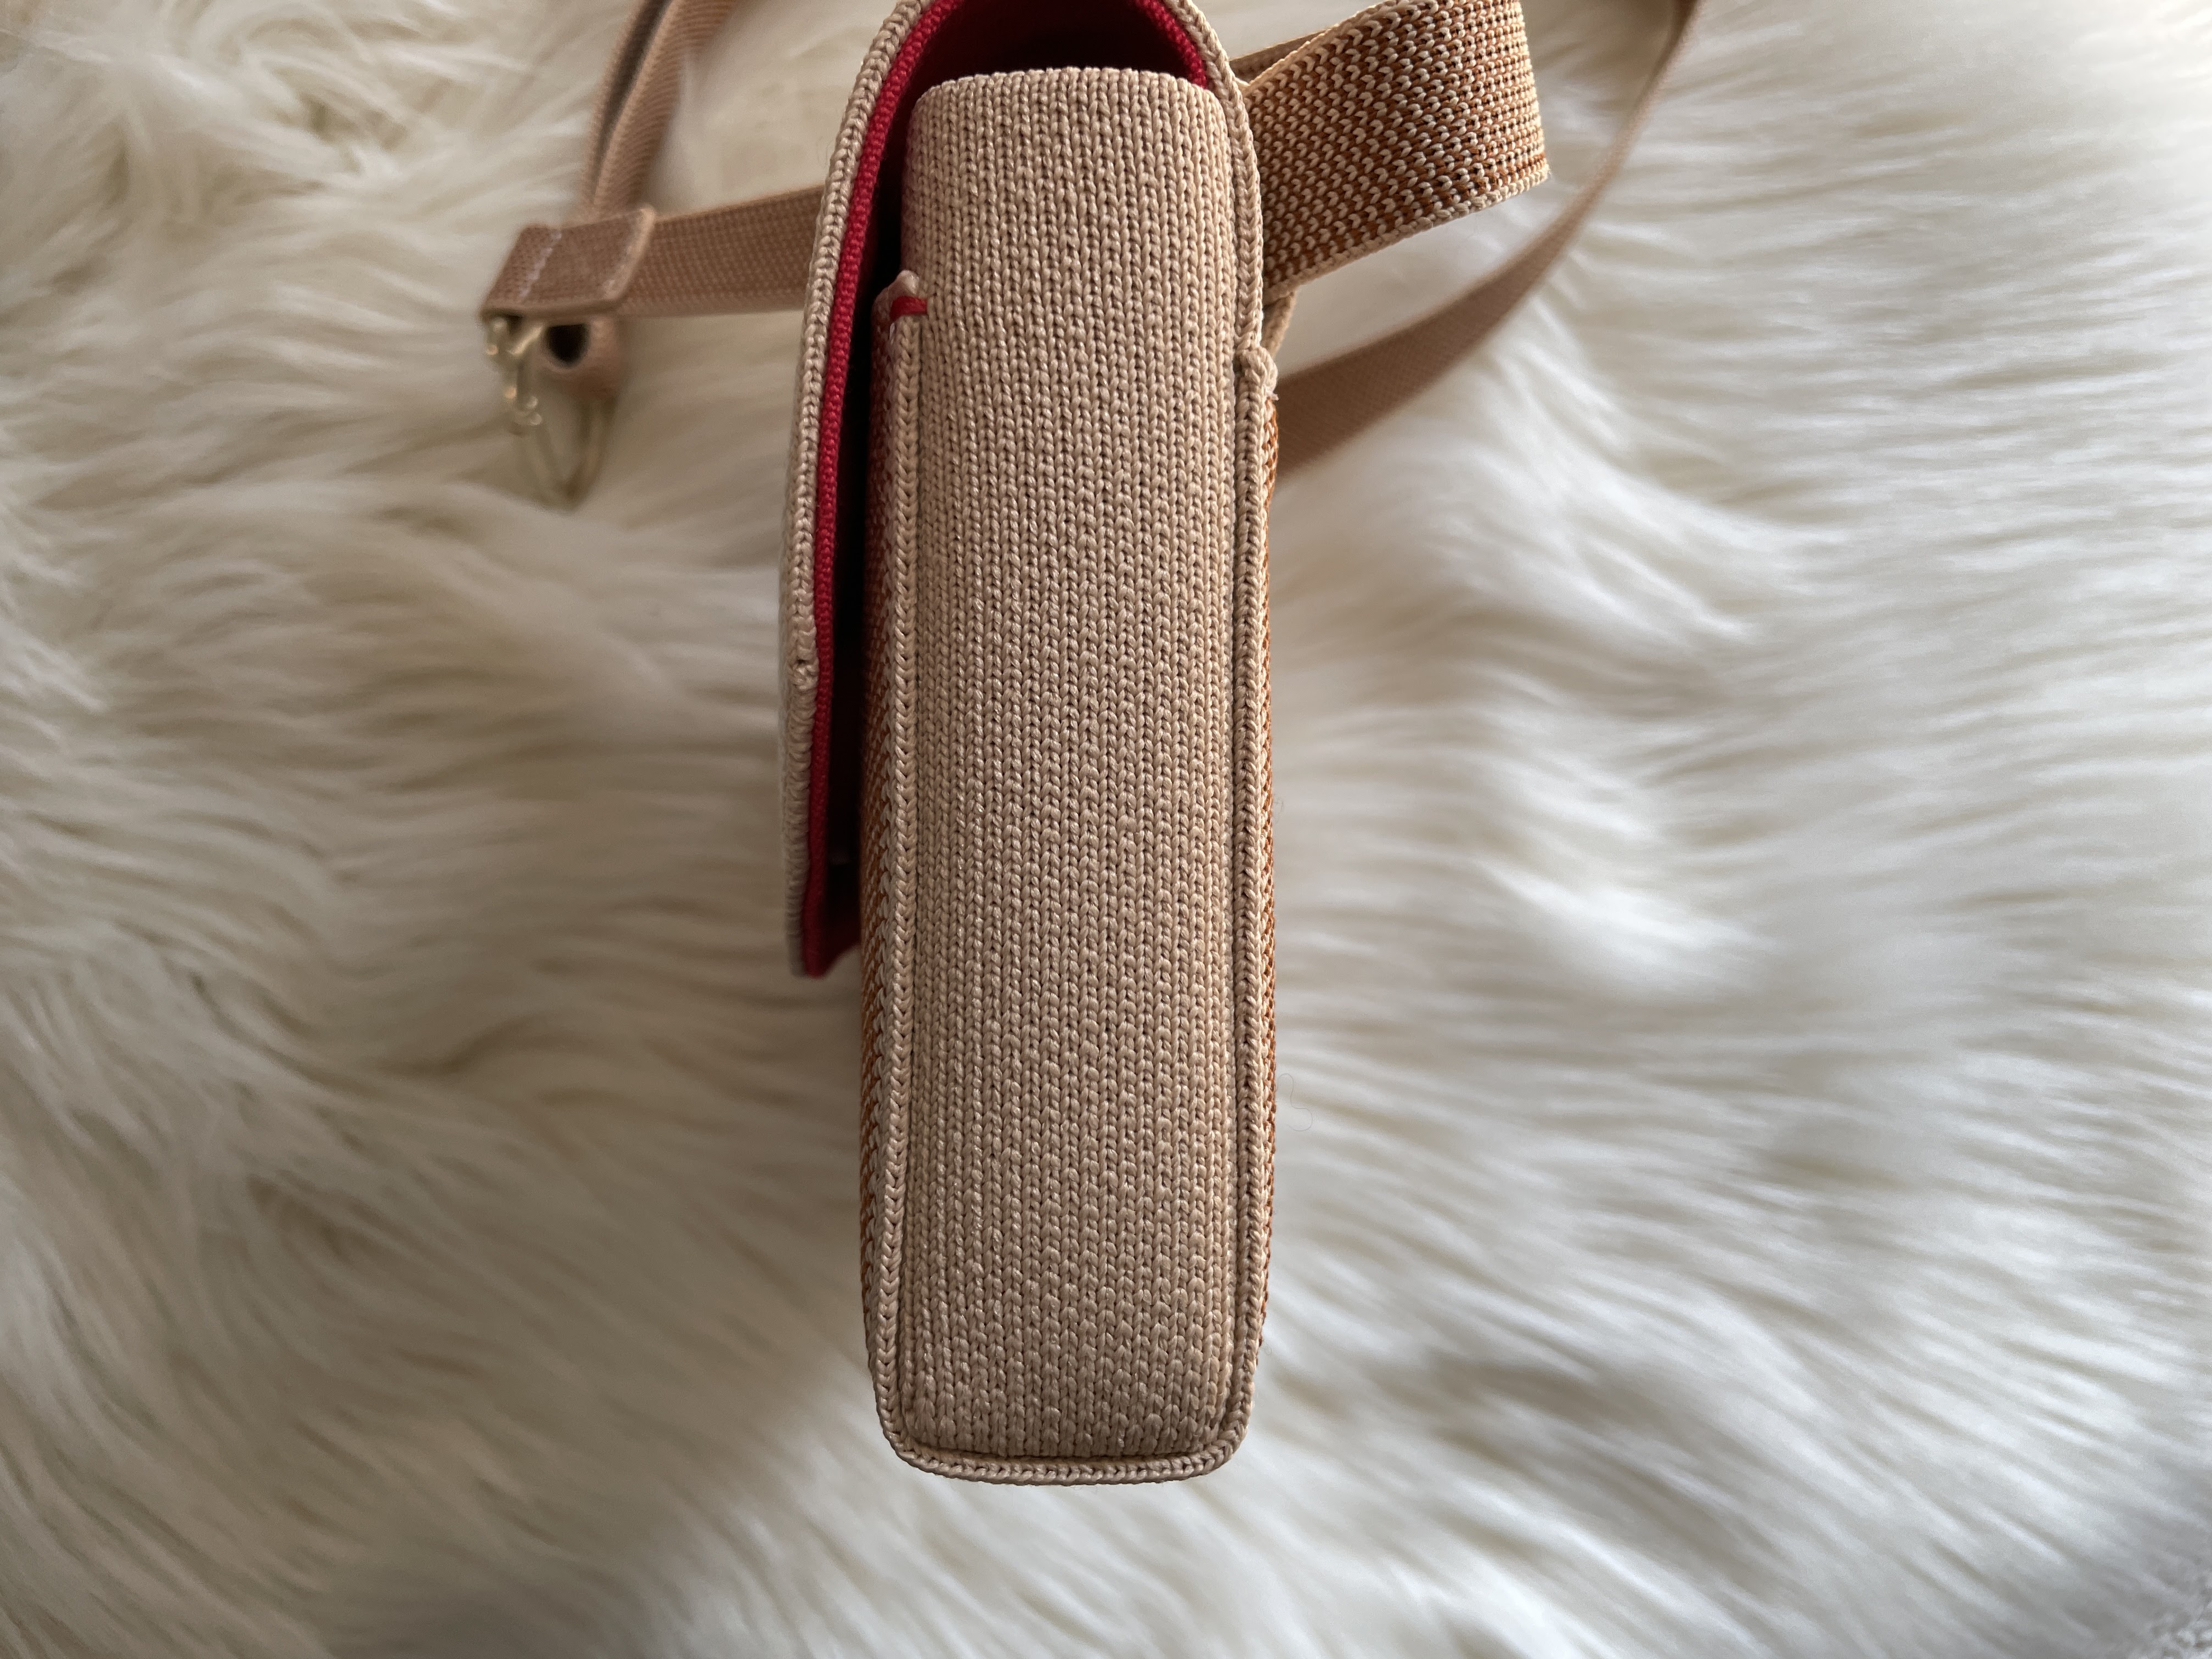 Fit Review Friday! Rothy's Merino Wool Loafer & The Belt Bag